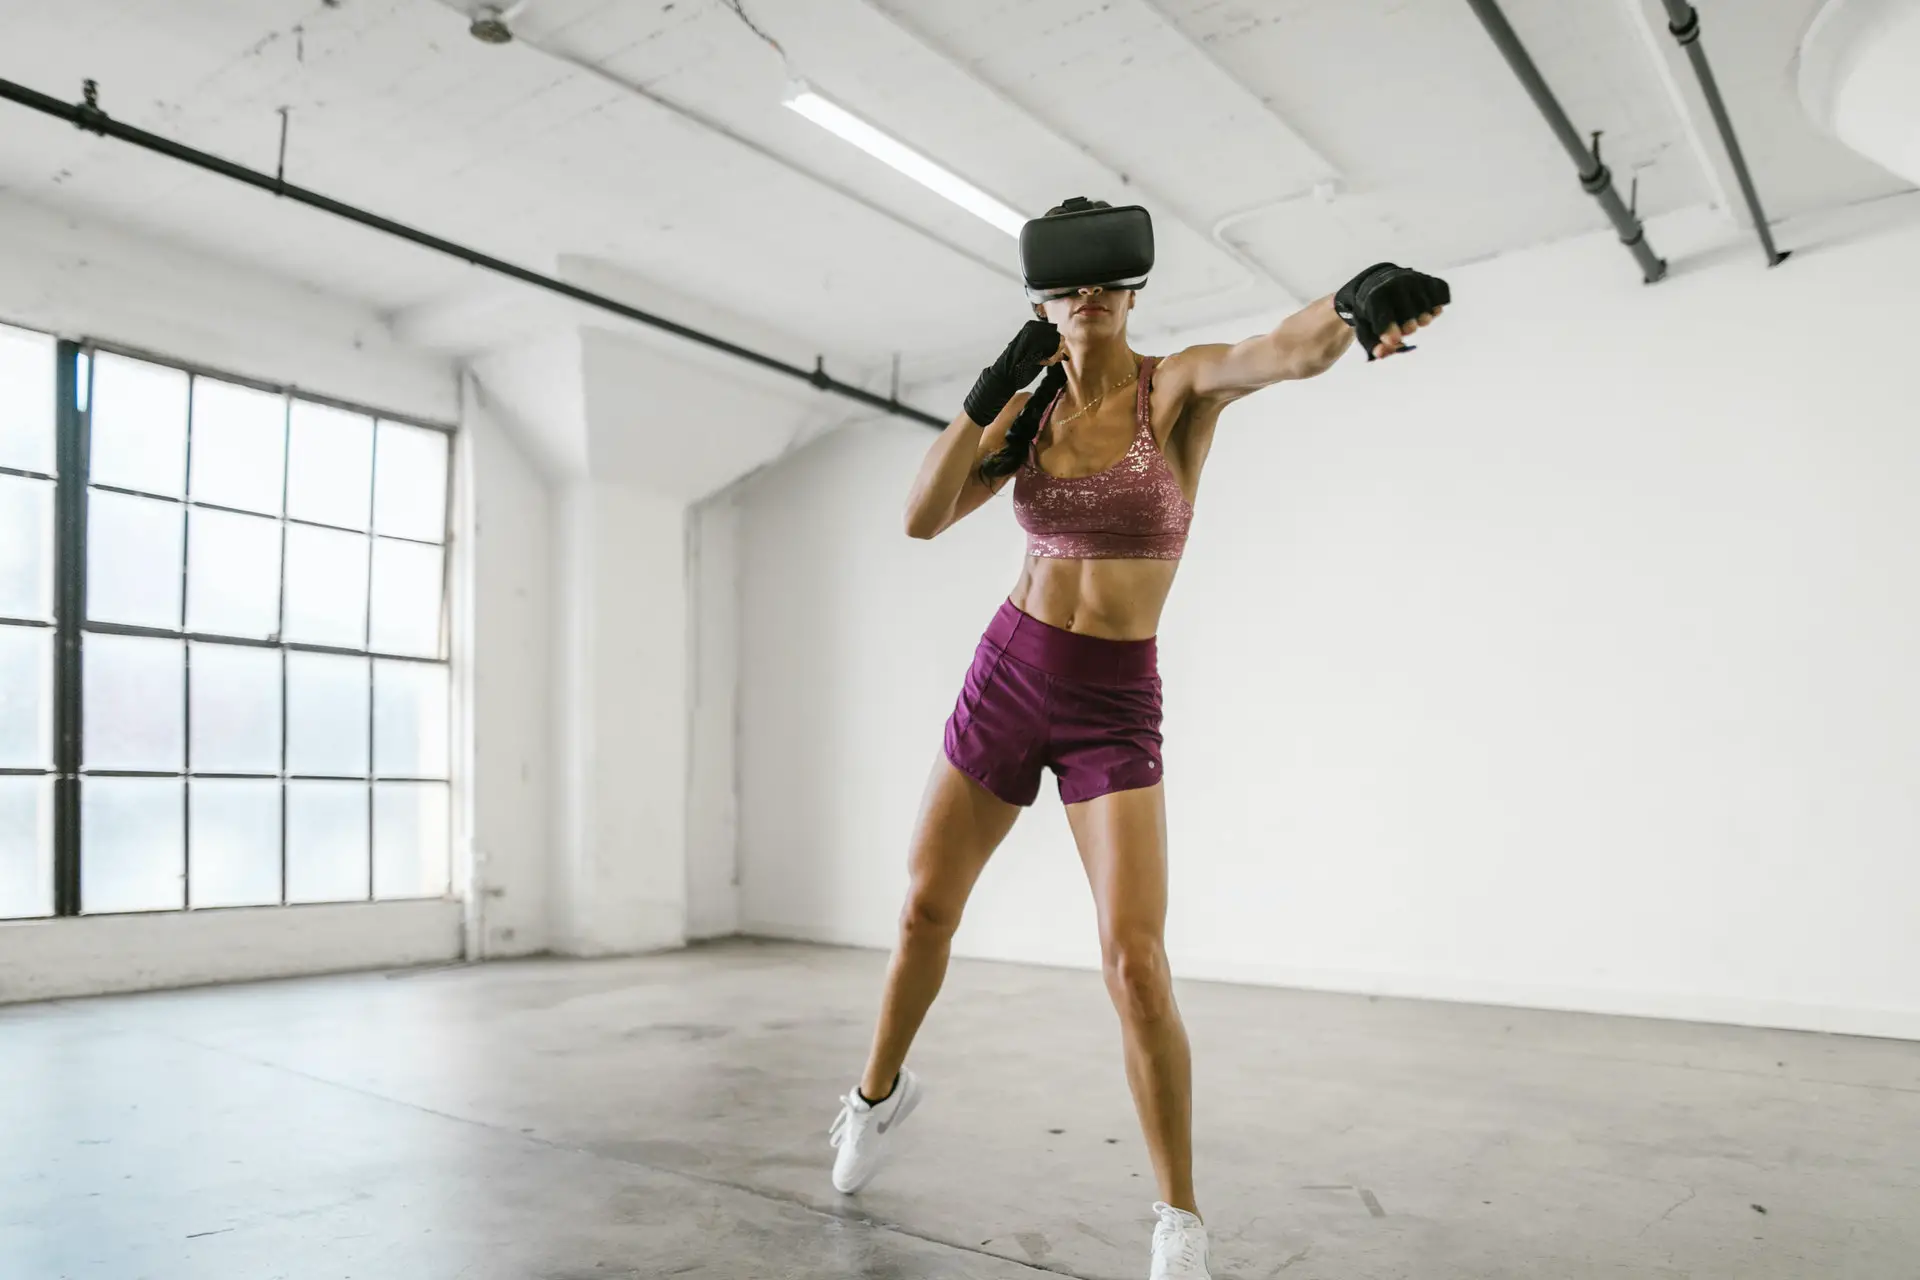 Les Mills Partners with Odders Labs to Introduce a VR Fitness Gaming App